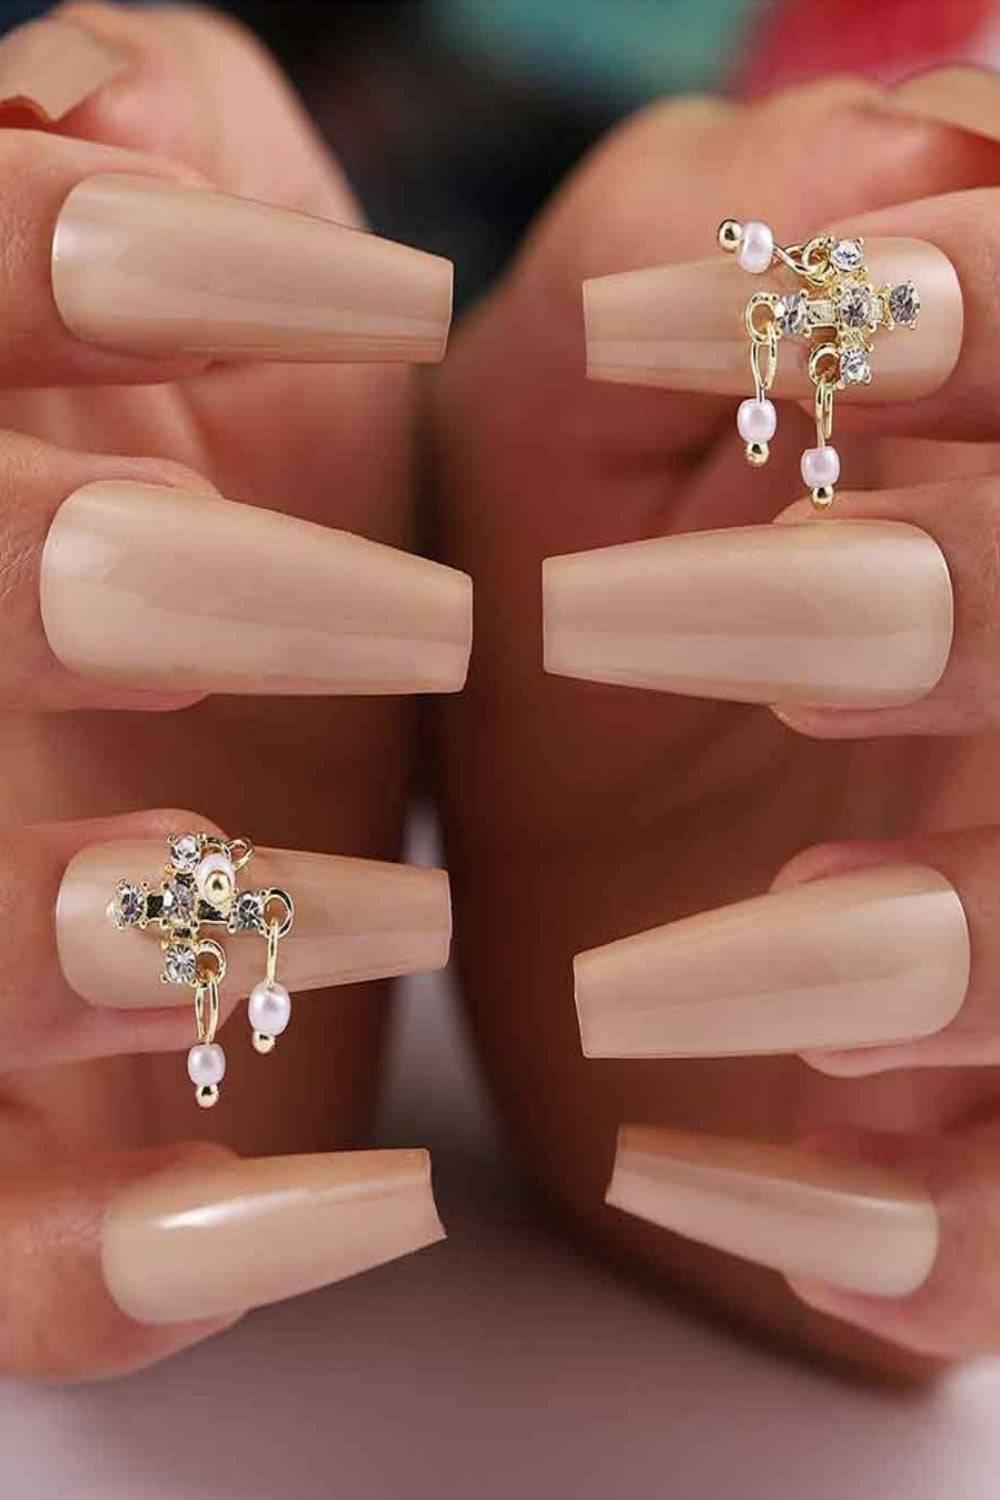 Boutique Nail Pearls